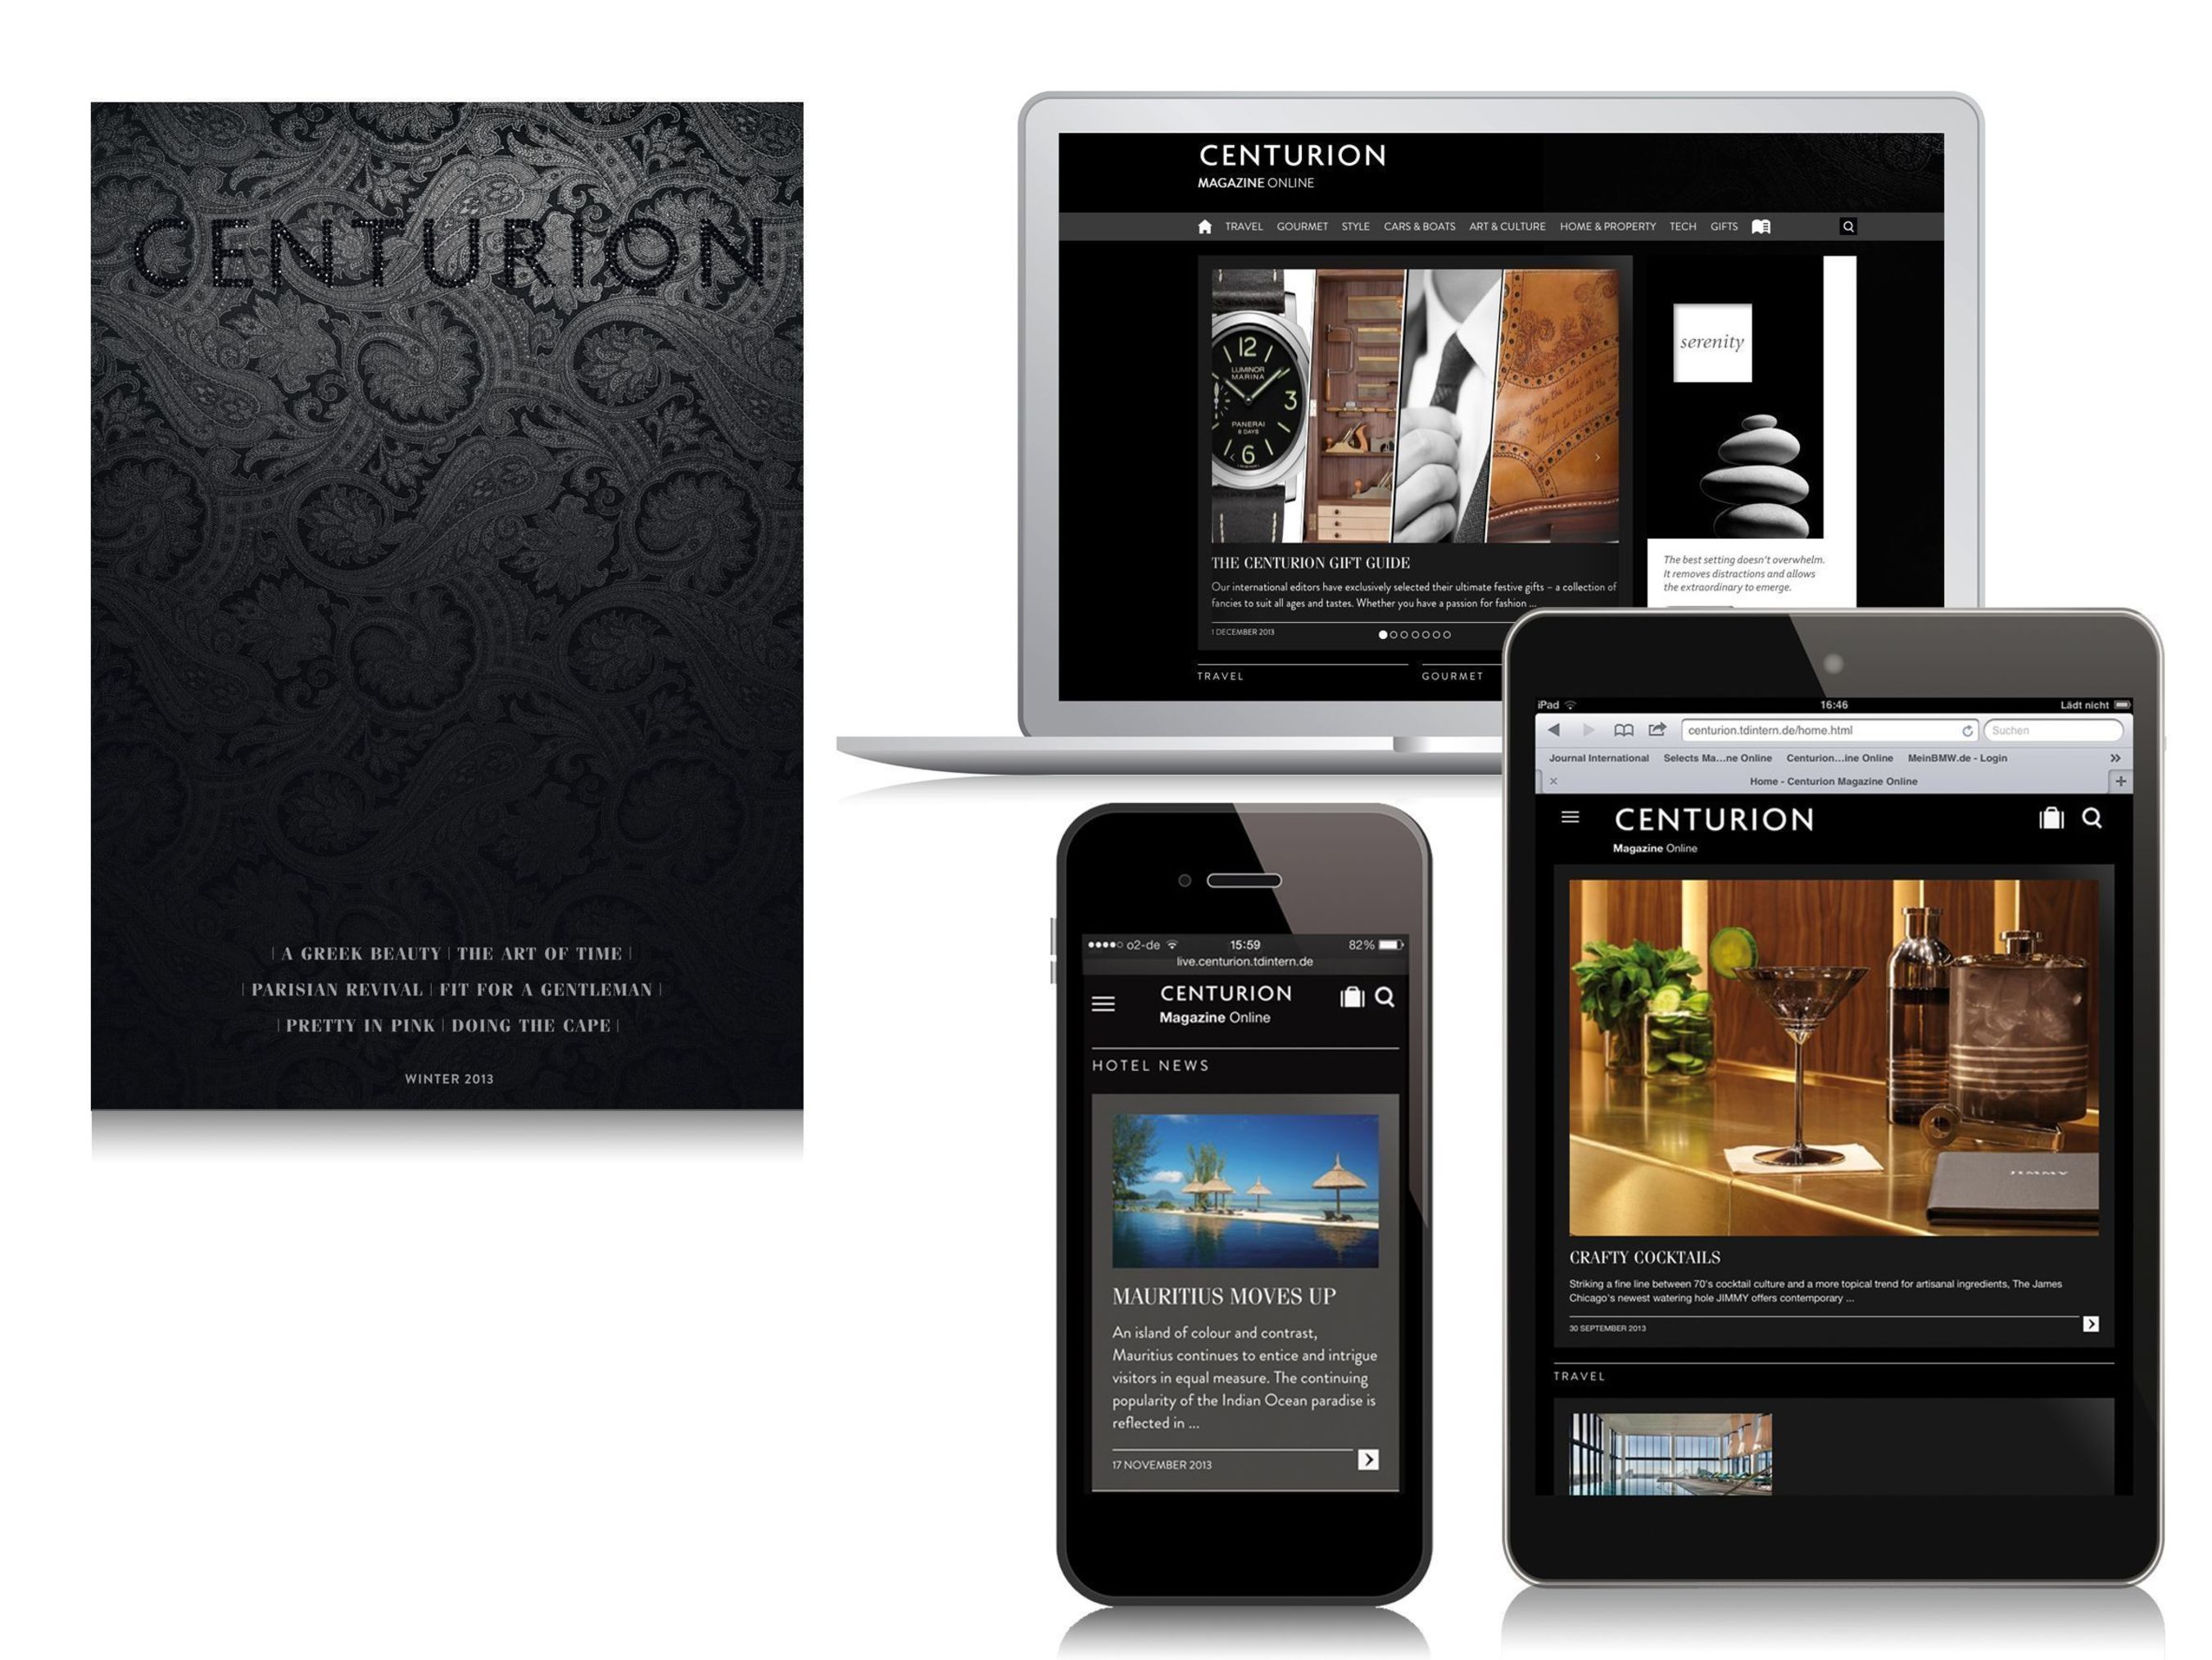 Centurion Magazine Online for Centurion Card Members from American Express. Relaunch provides a whole new online experience and elevates the site to the ranks of the worldâ€™s most influential sources of luxury news, views and inspiration. (PRNewsFoto/Journal International)